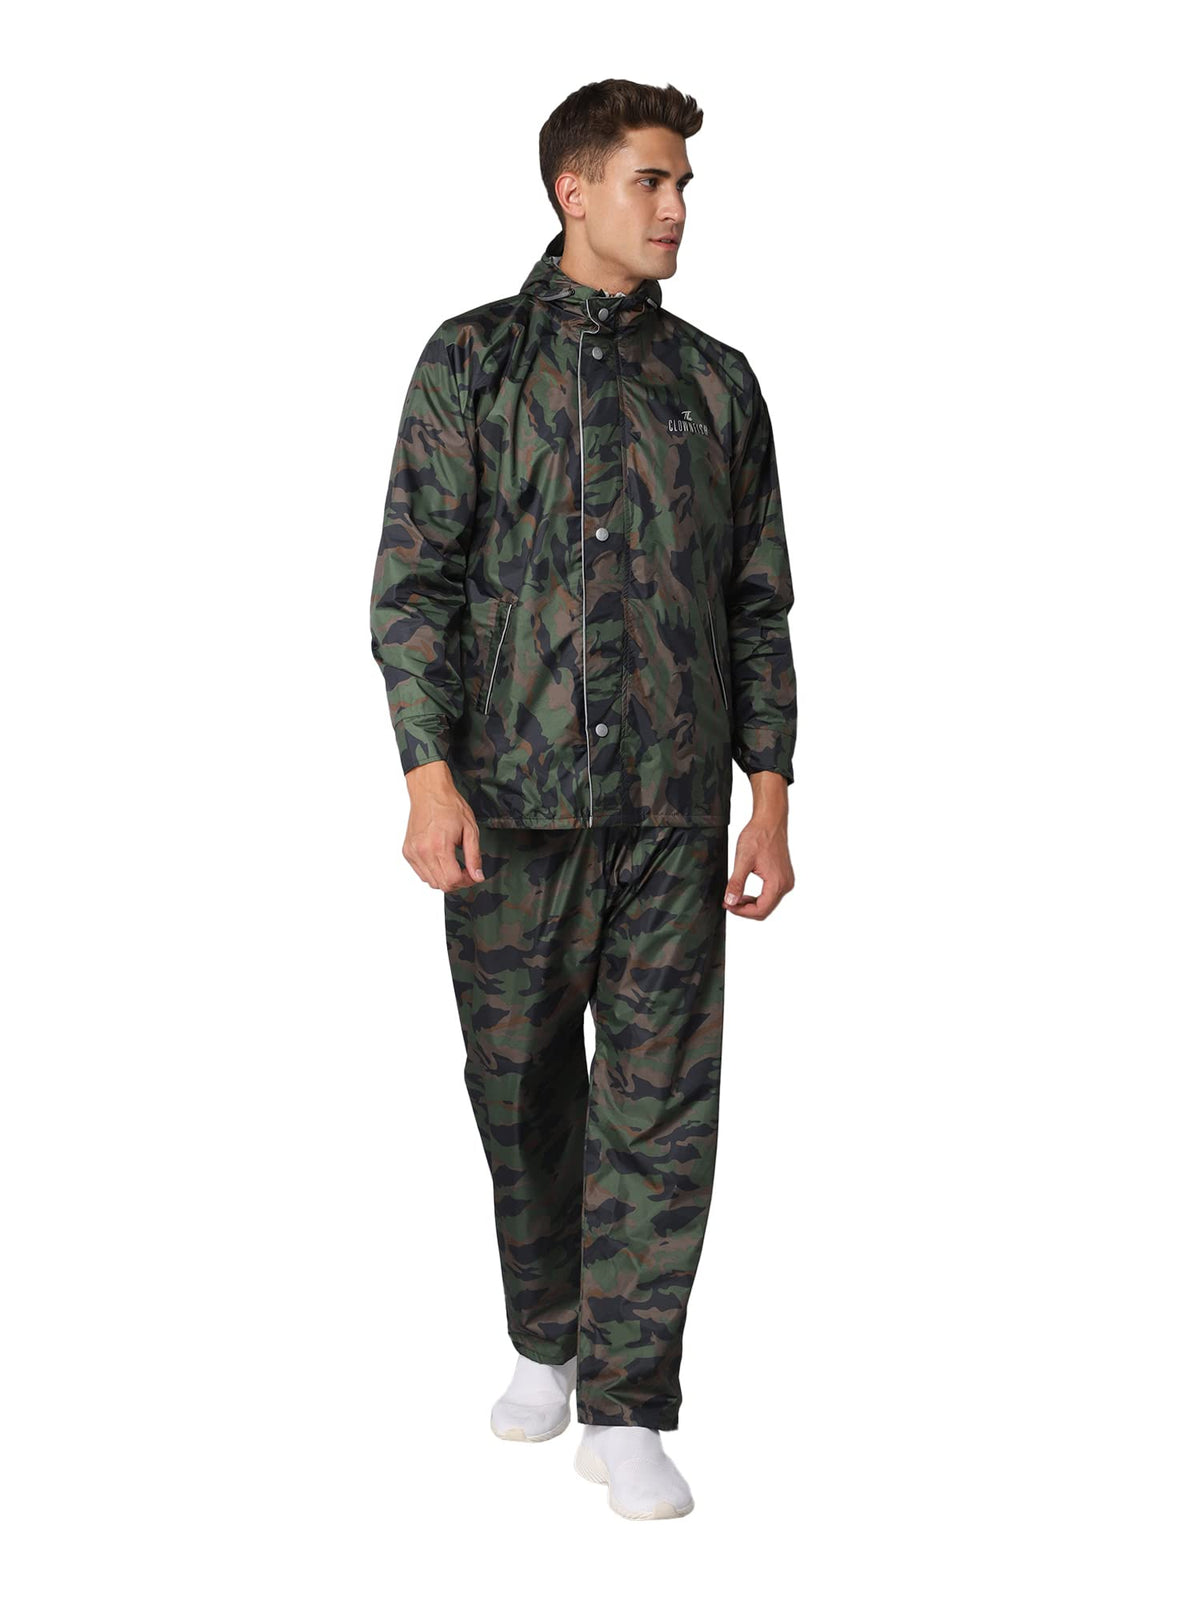 THE CLOWNFISH Warrior Pro Series Men's Waterproof Polyester Double Coating Reversible Raincoat with Hood and Reflector Logo at Back for Night Travelling. Set of Top and Bottom (Green Camo, X-Large)